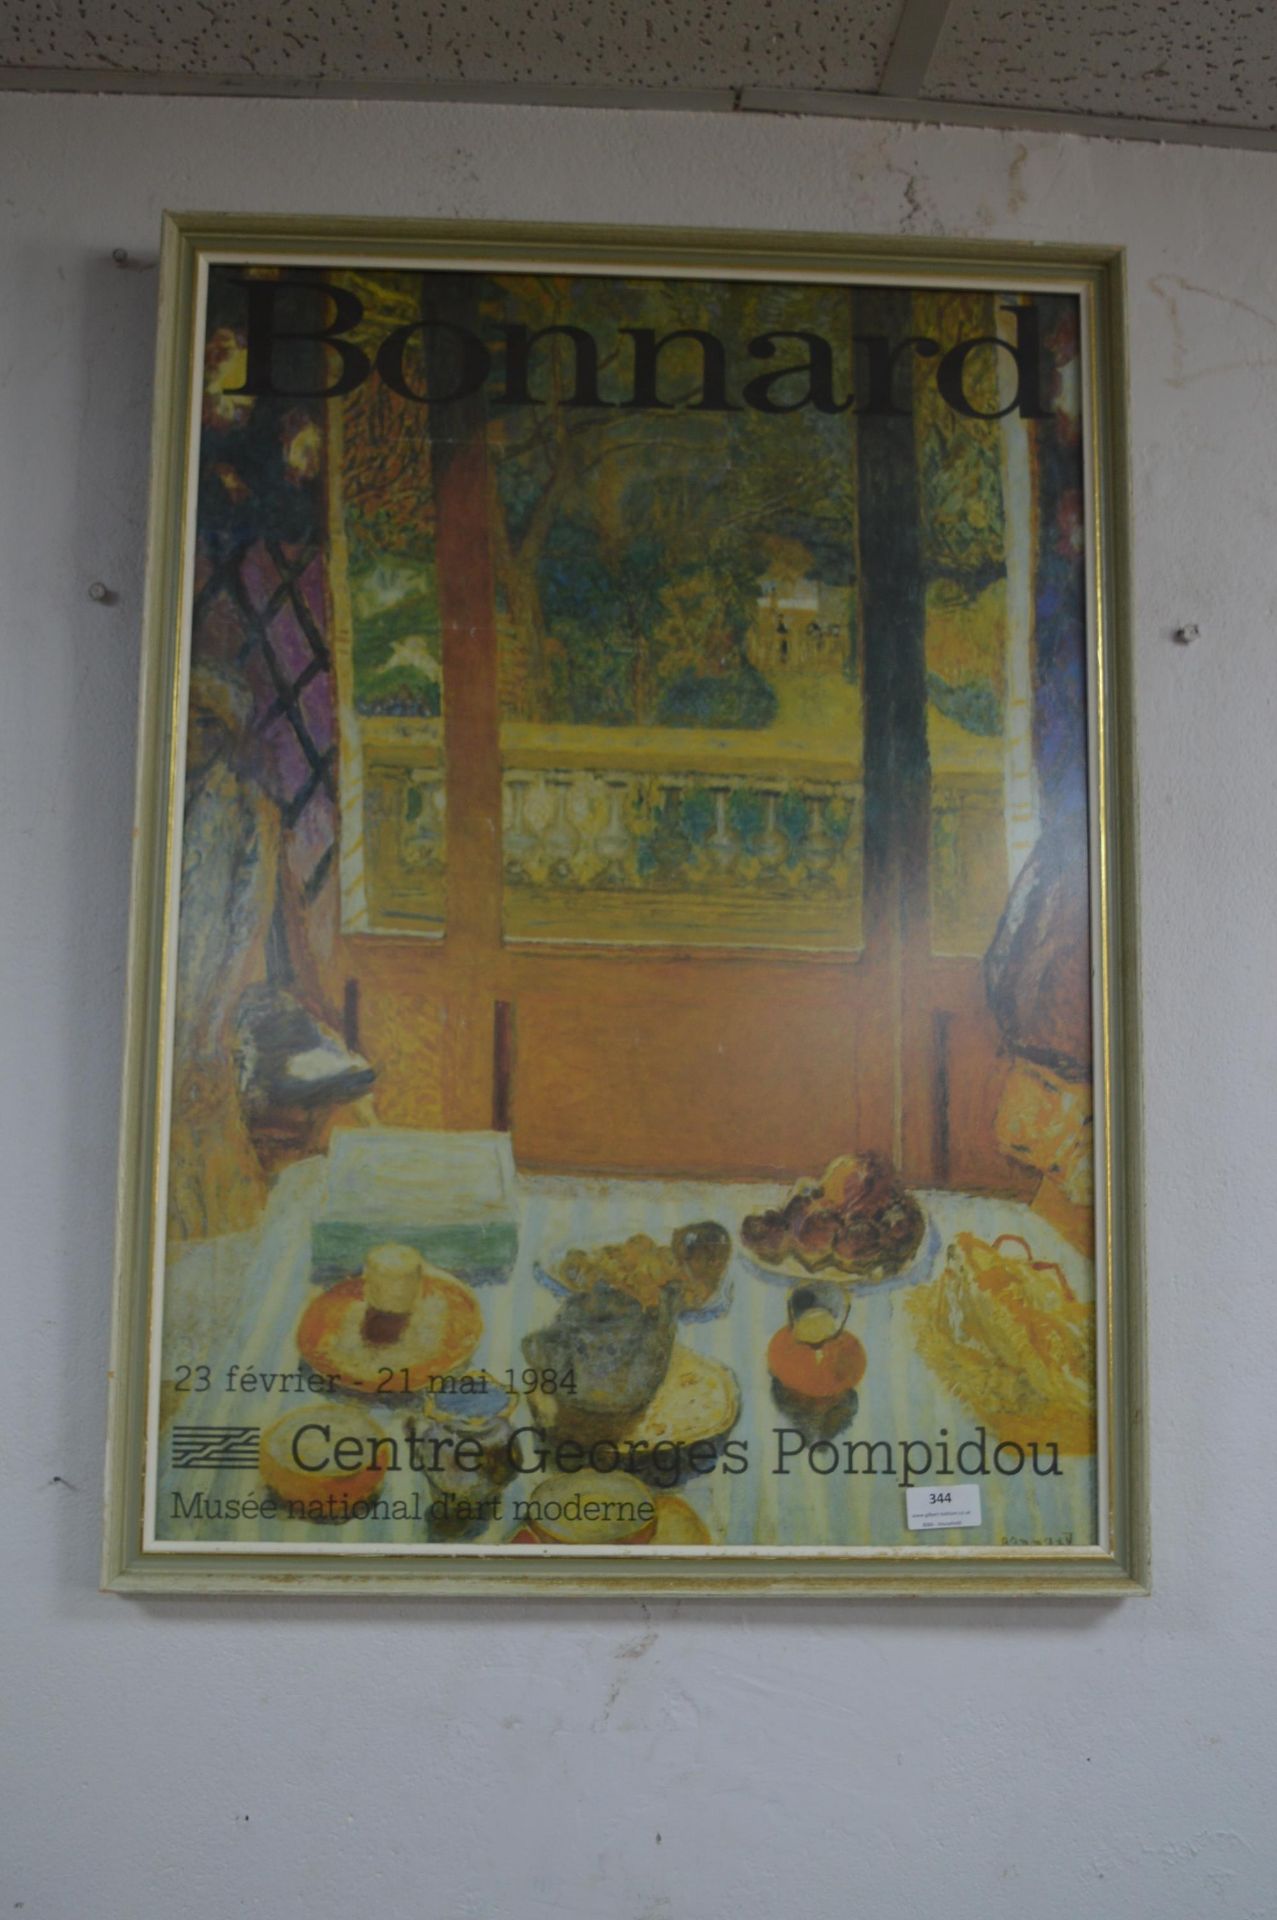 Art Poster for a Bonnard Exhibition - Image 2 of 2